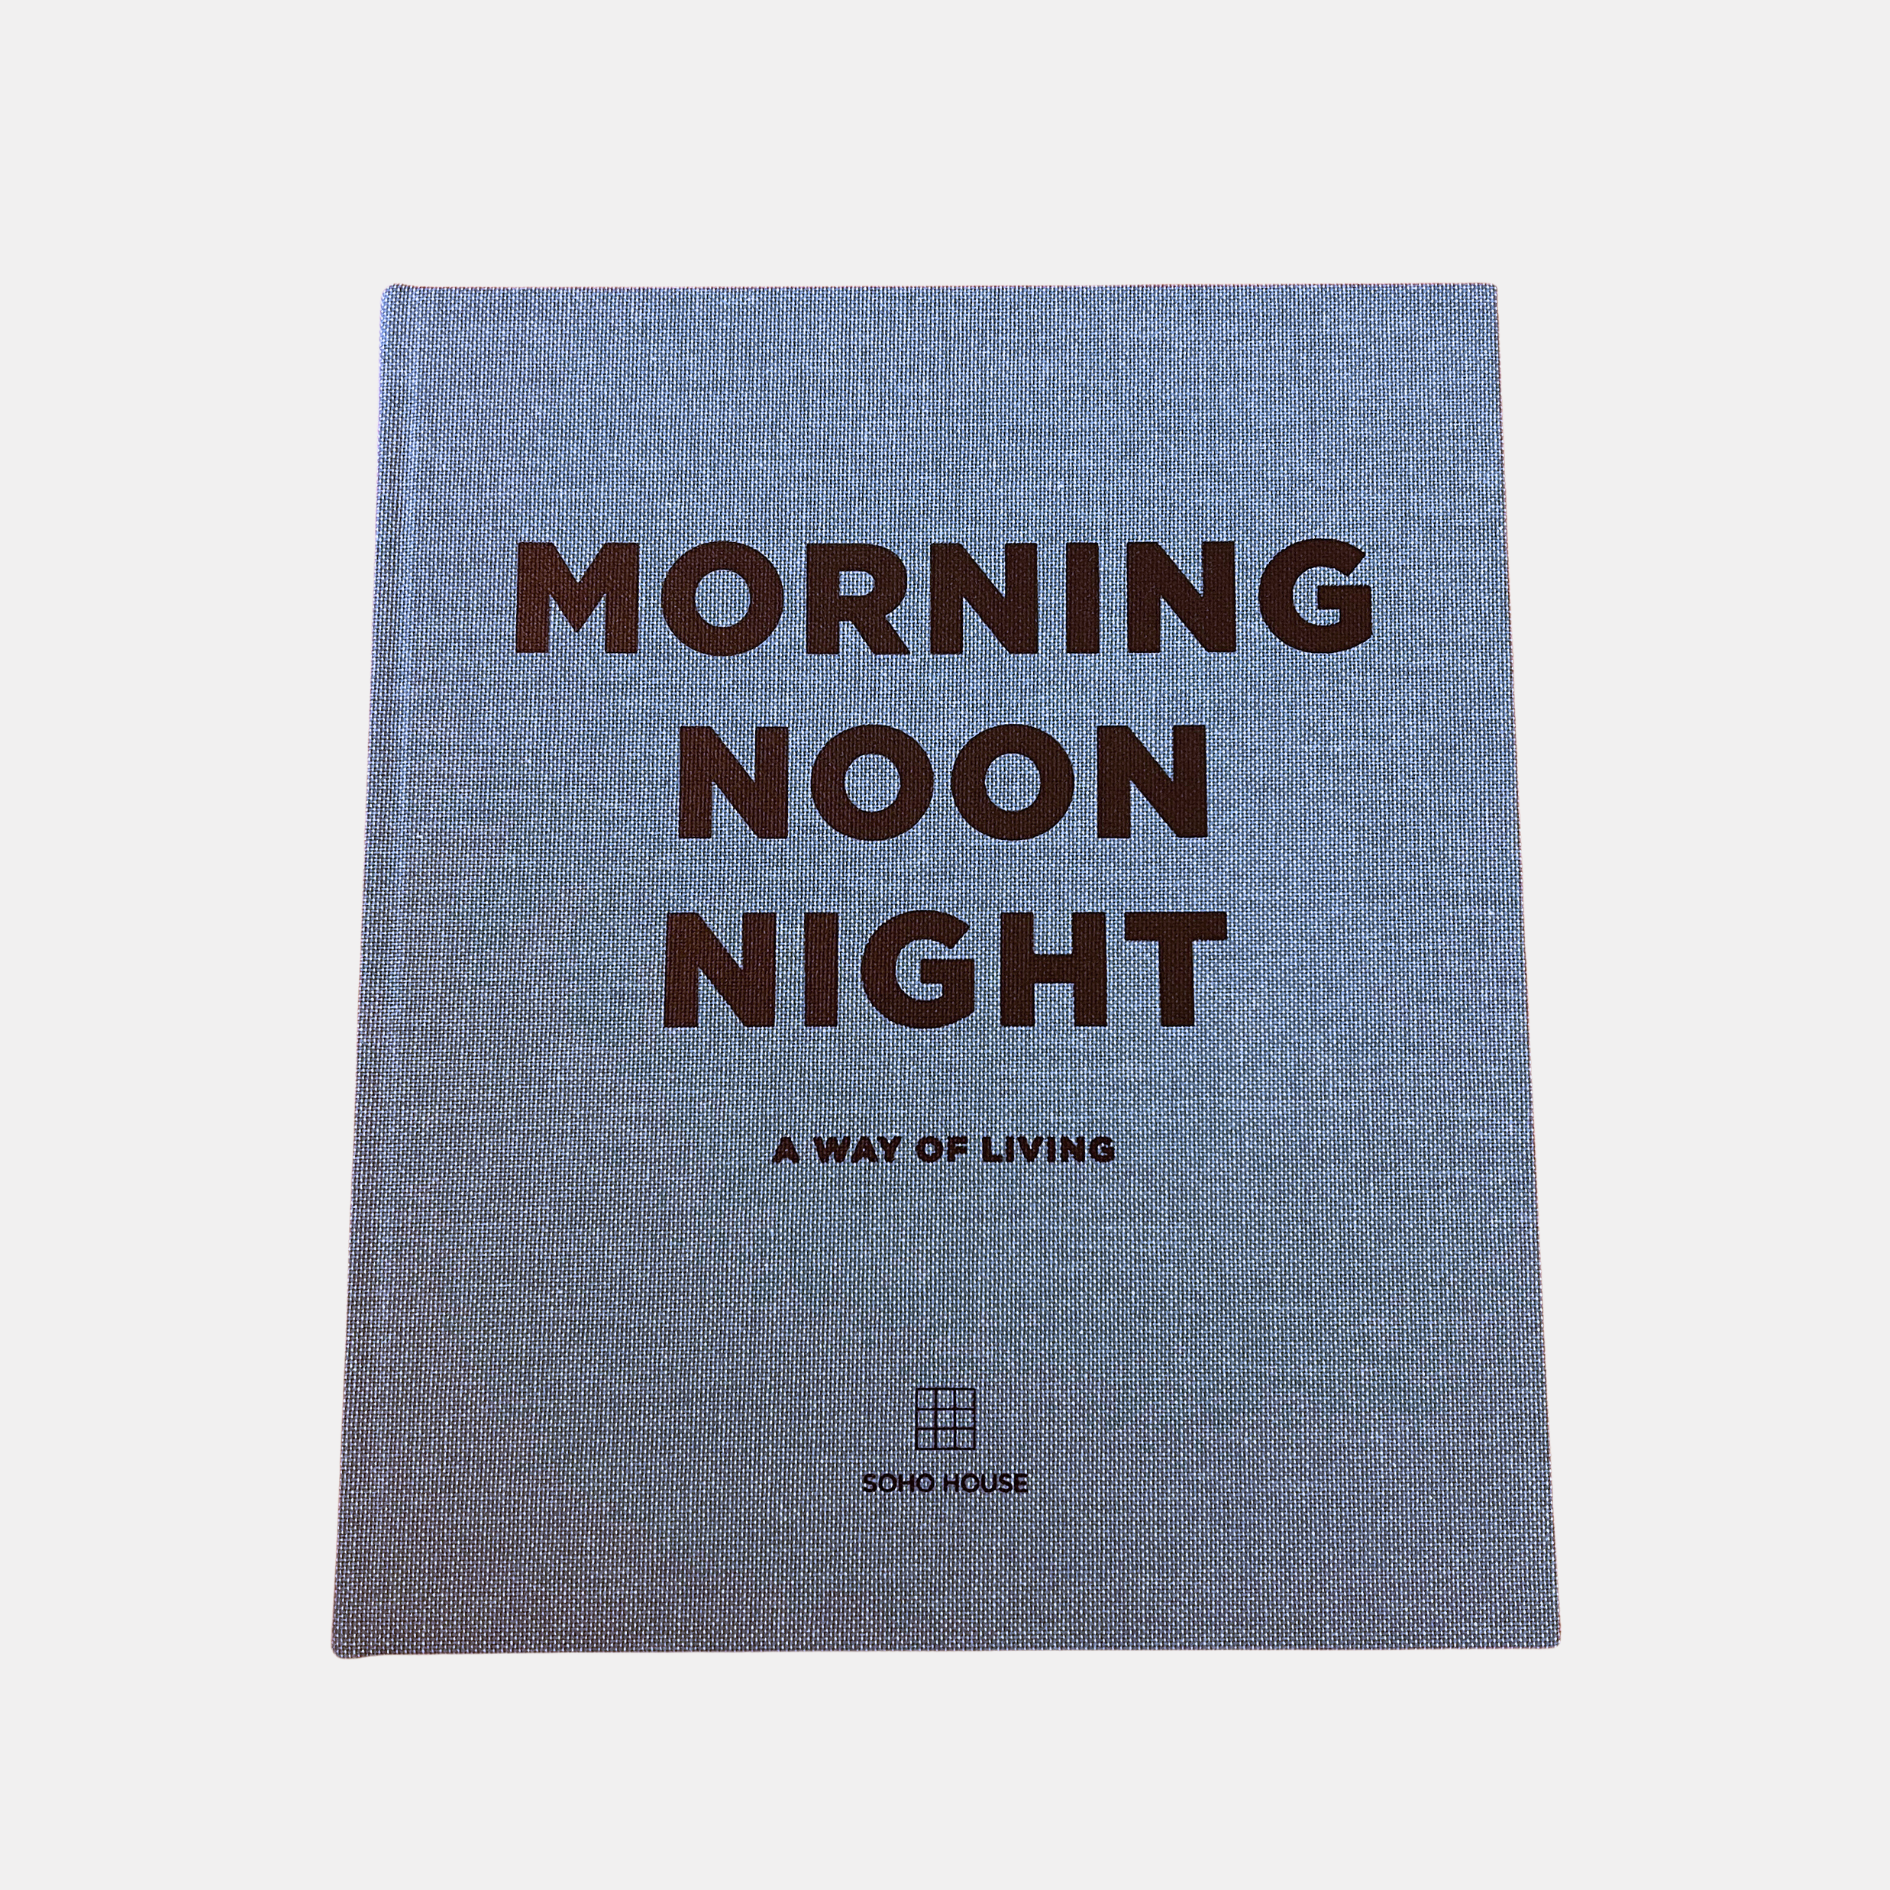 MORNING NOON NIGHT: A WAY OF LIVING